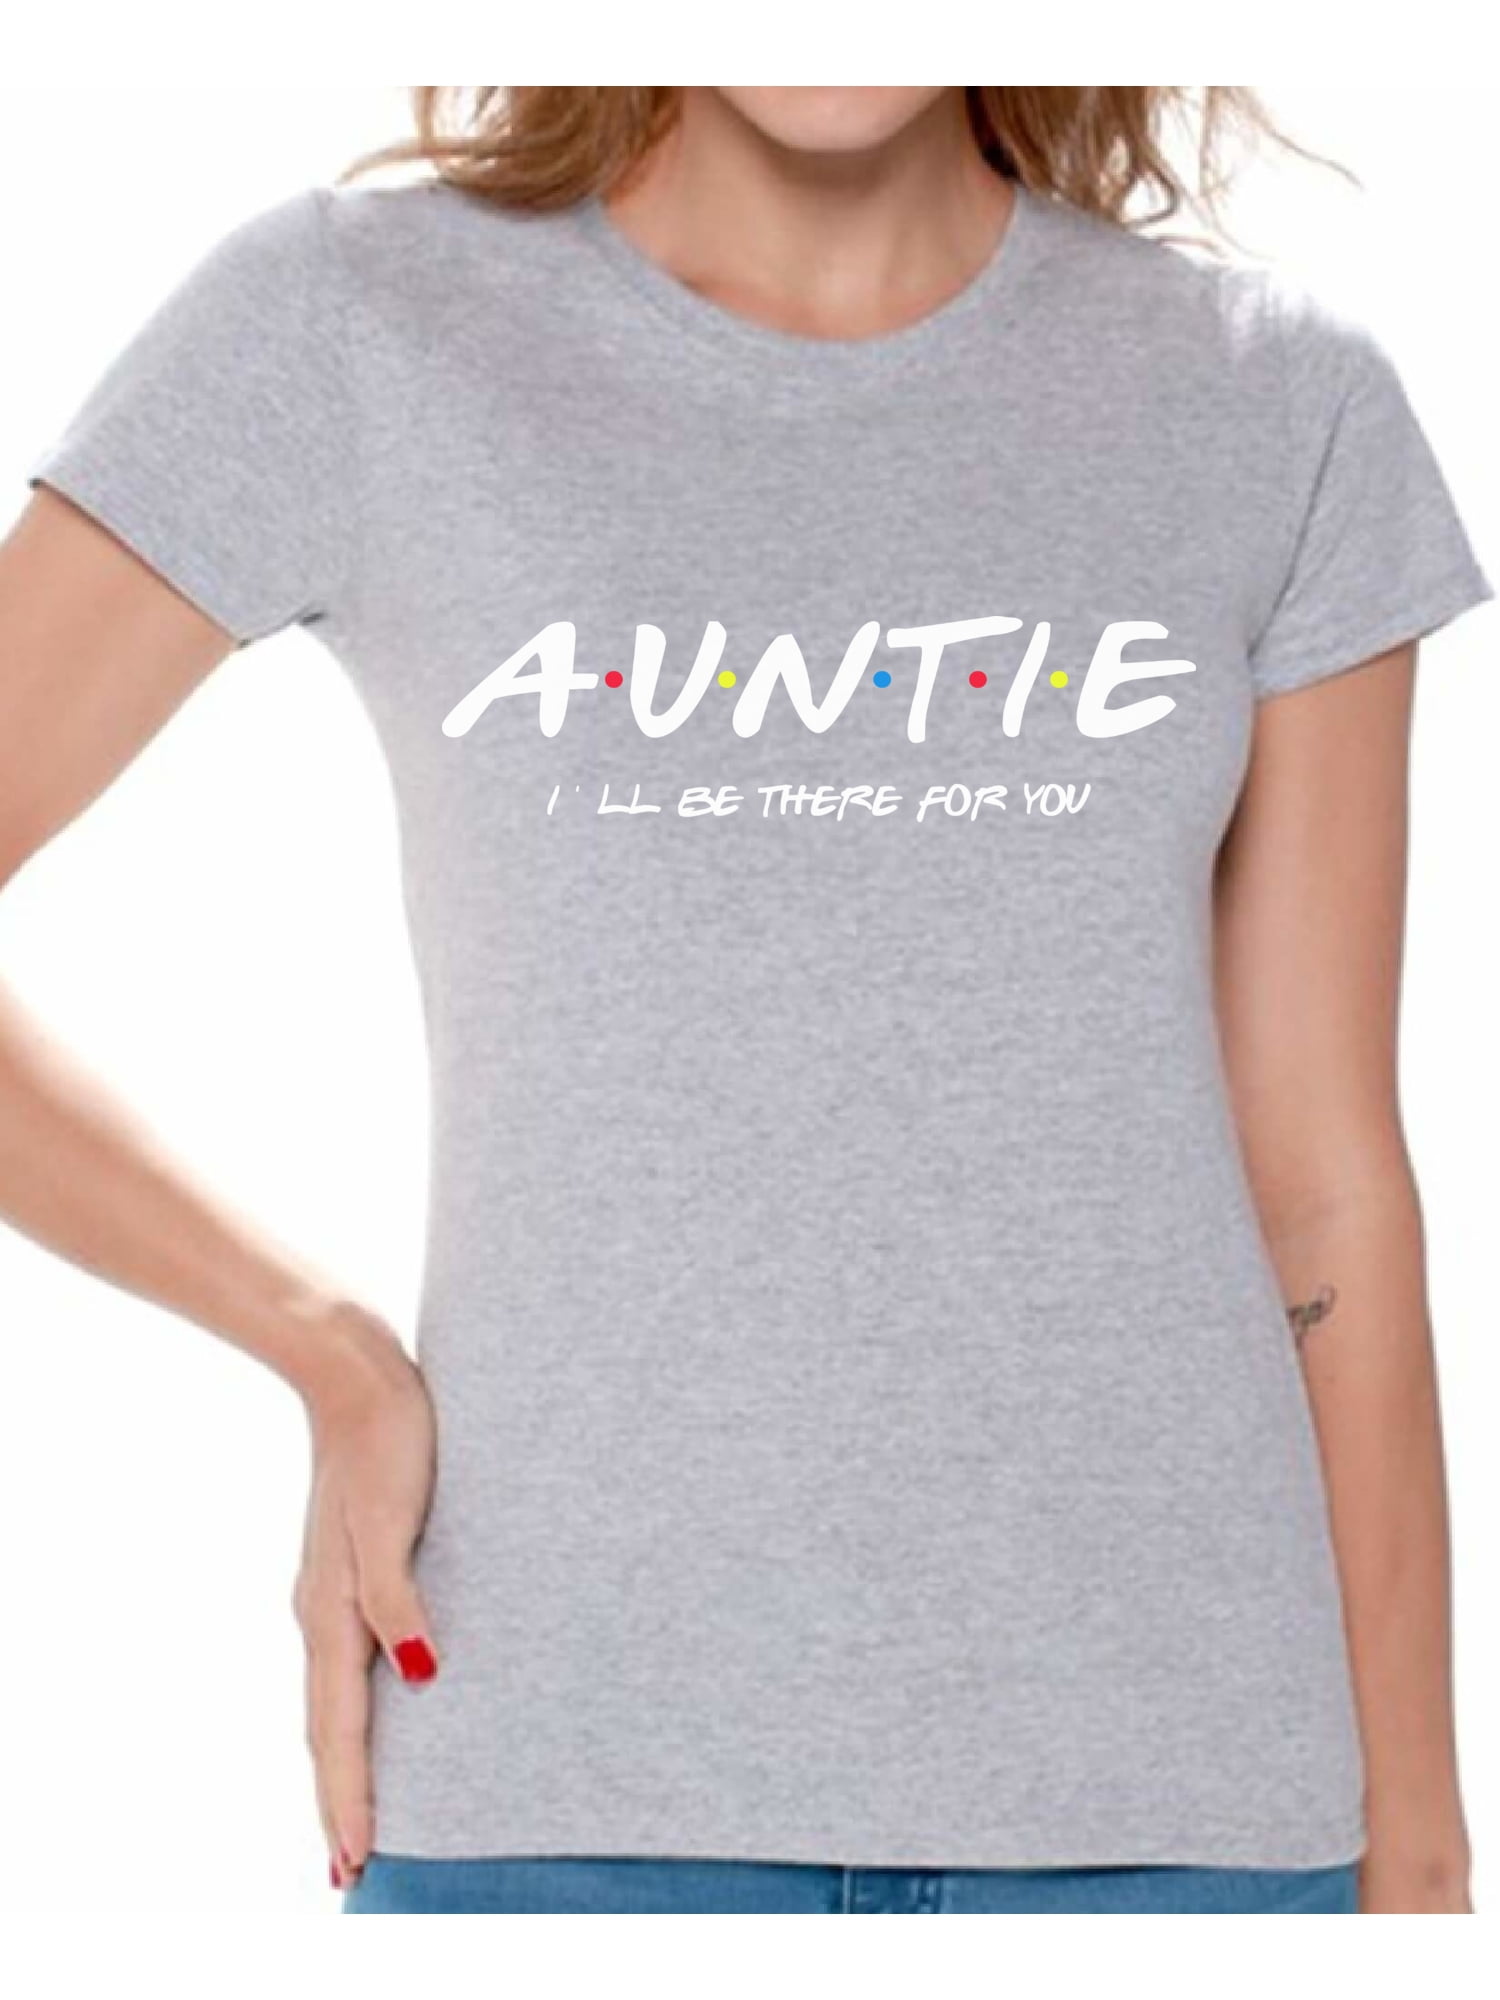 Auntie Claus Christmas Shirt,Auntie Christmas Shirt,Santa Holiday Top,Aunt Christmas,Auntie Claus Tee,Baby Announcement,Pregnancy Reveal